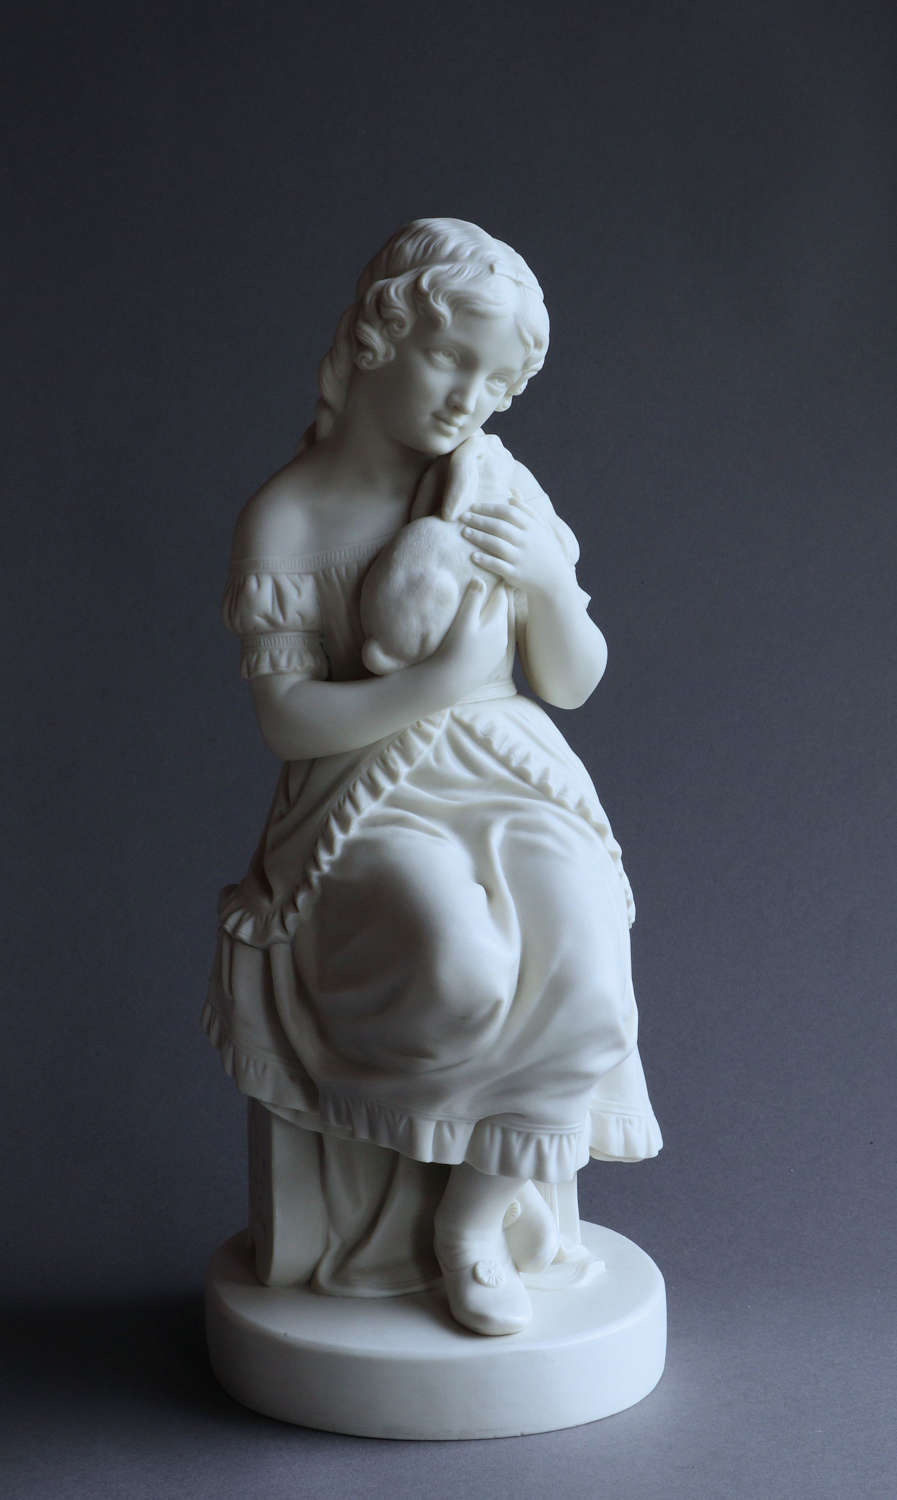 A Copeland Parian figure of “The Pets” or “Girl with Rabbit”